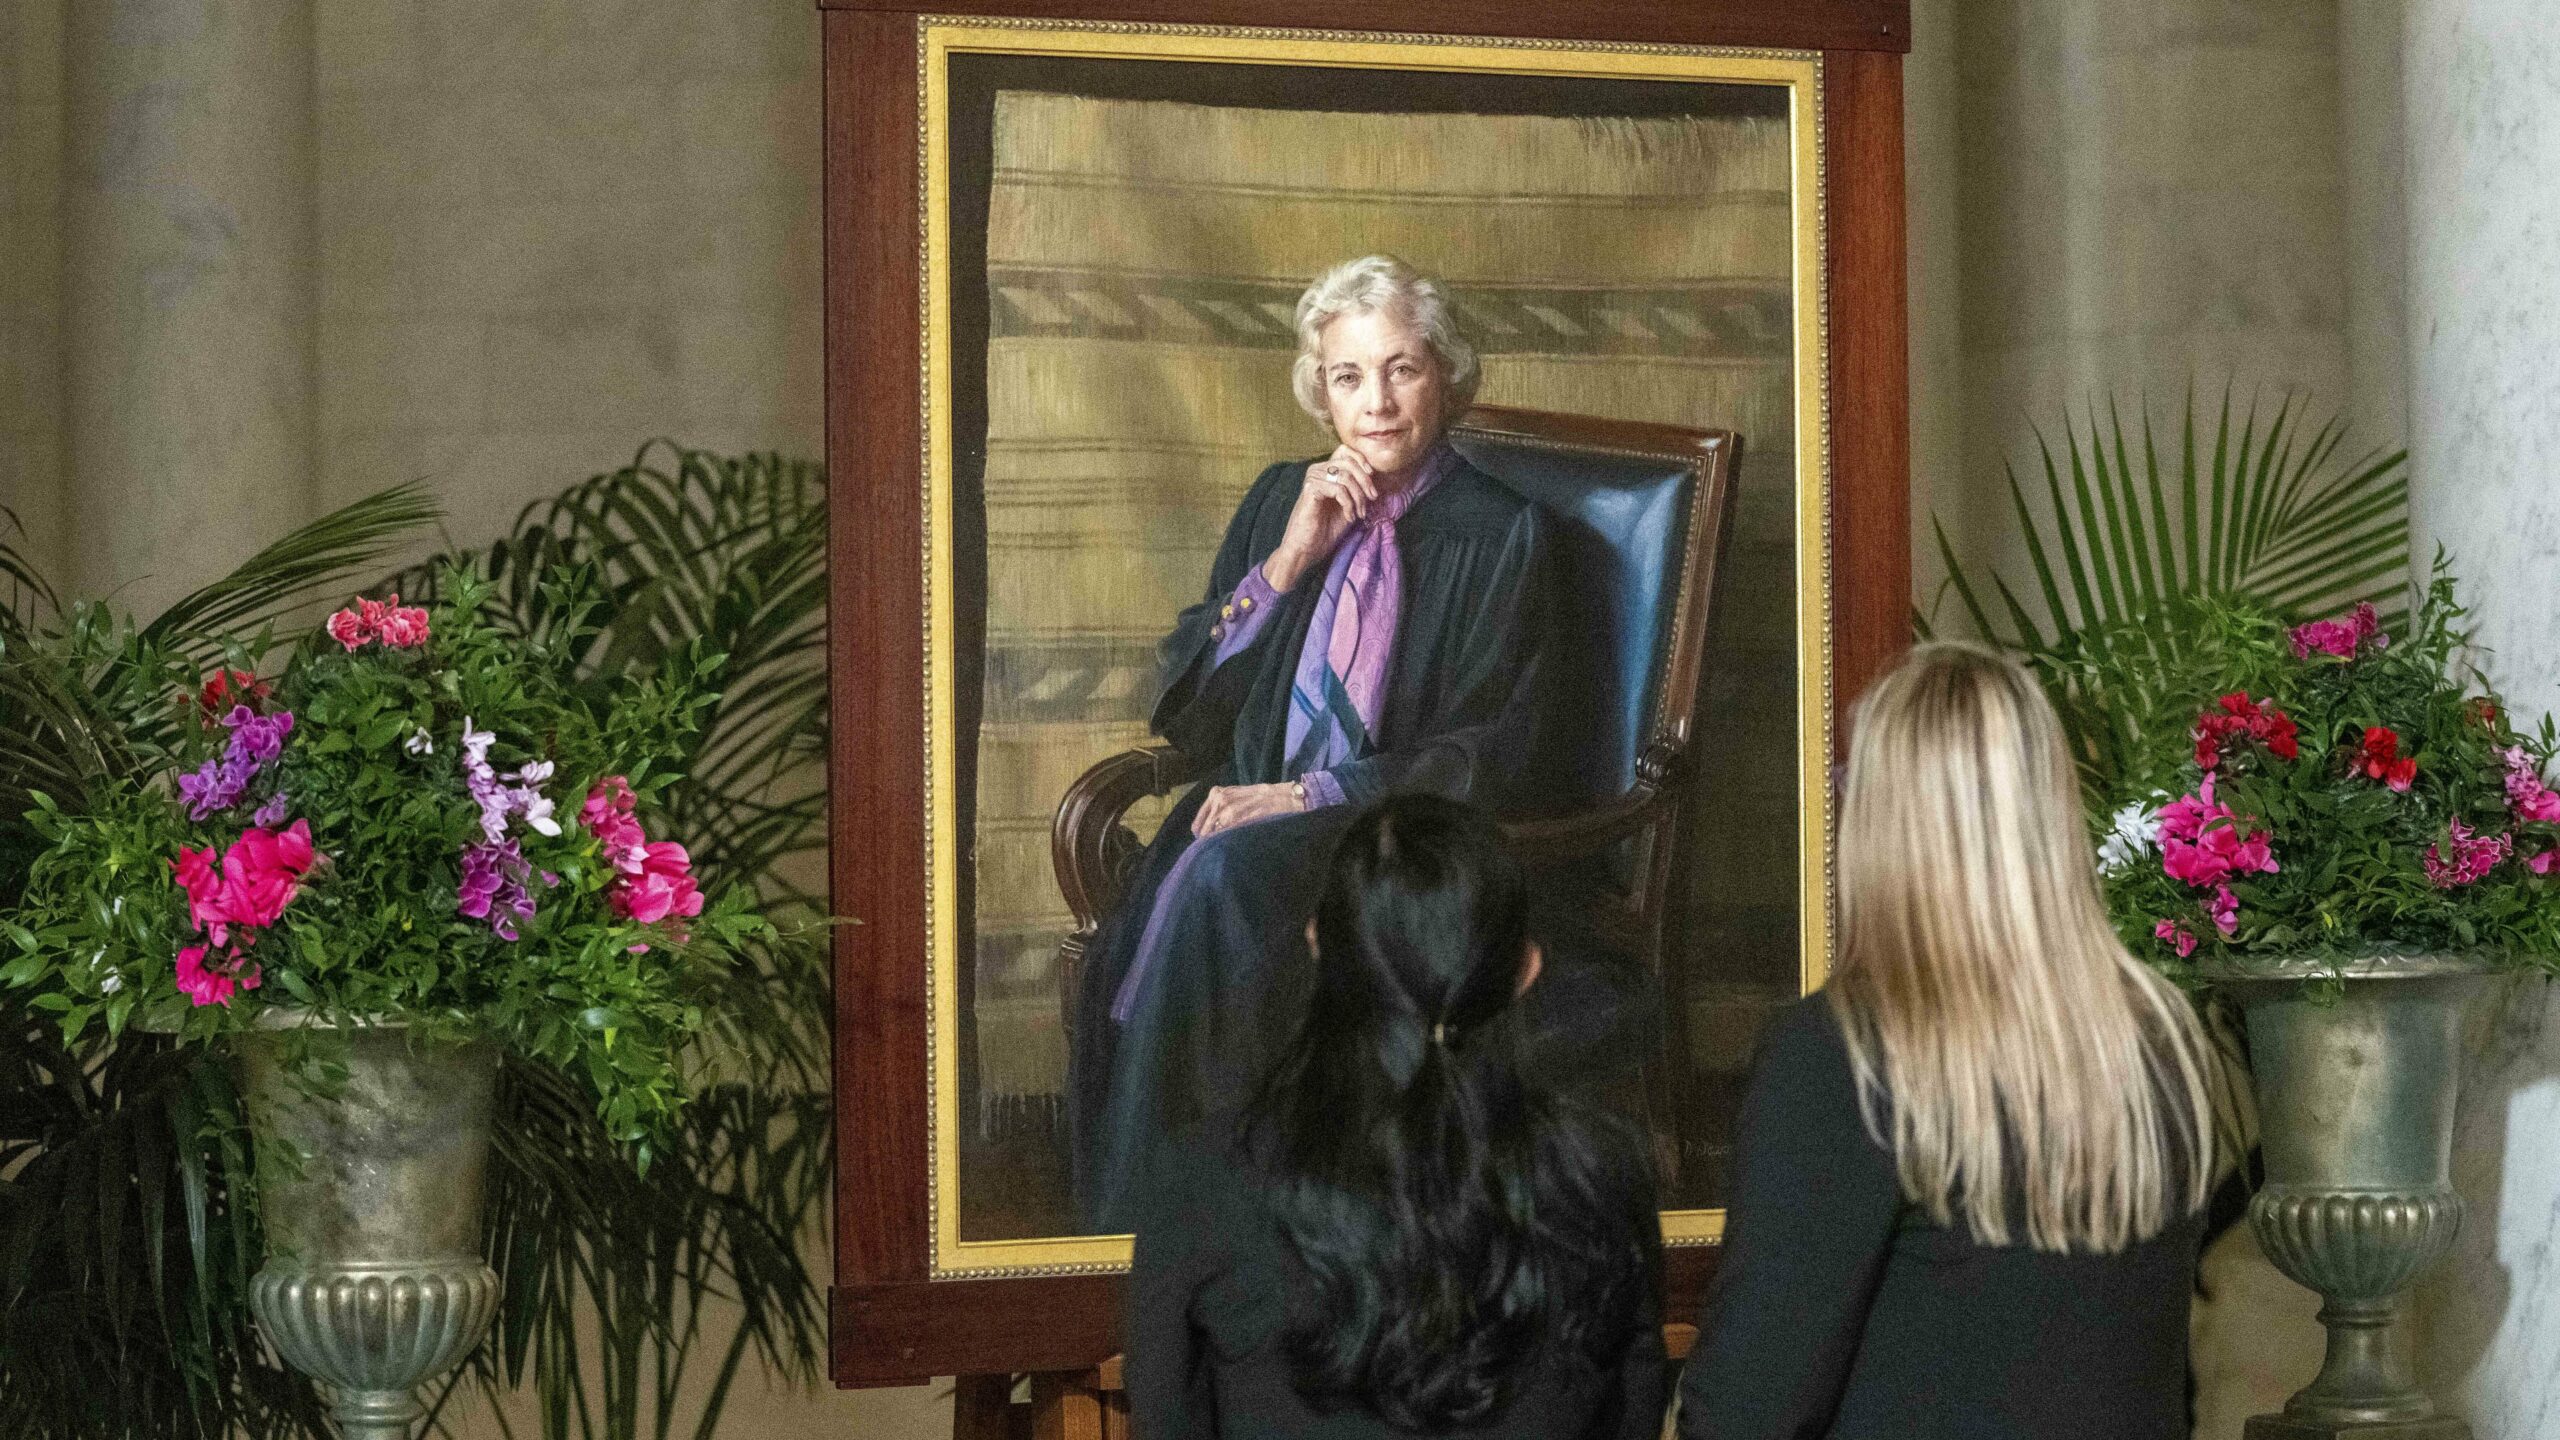 Sandra Day O’Connor’s legacy extends far beyond the Supreme Court, her son says